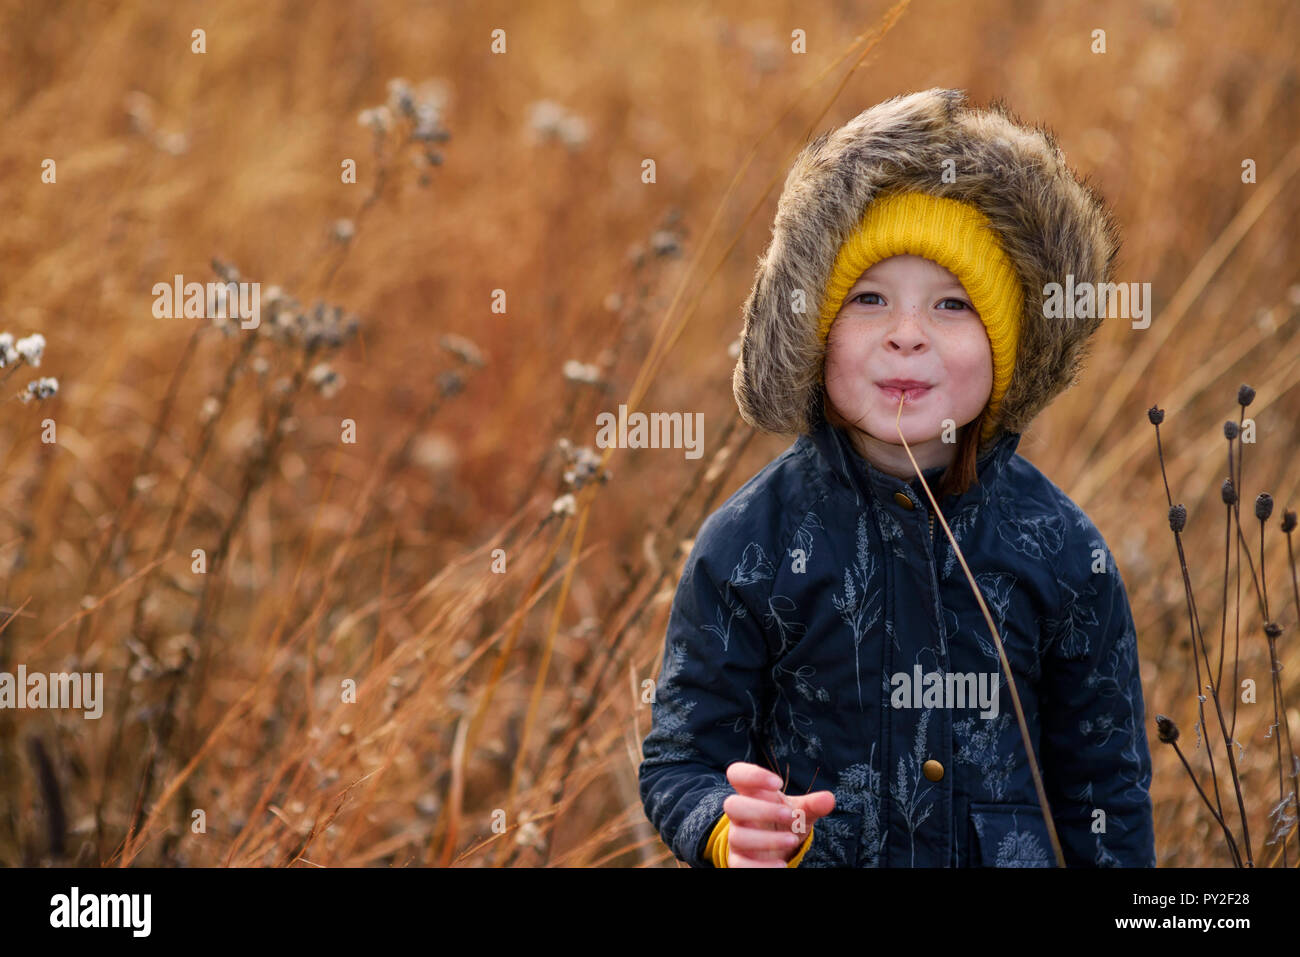 Portrait of a smiling girl standing in a field chewing a piece of long grass, United States Stock Photo